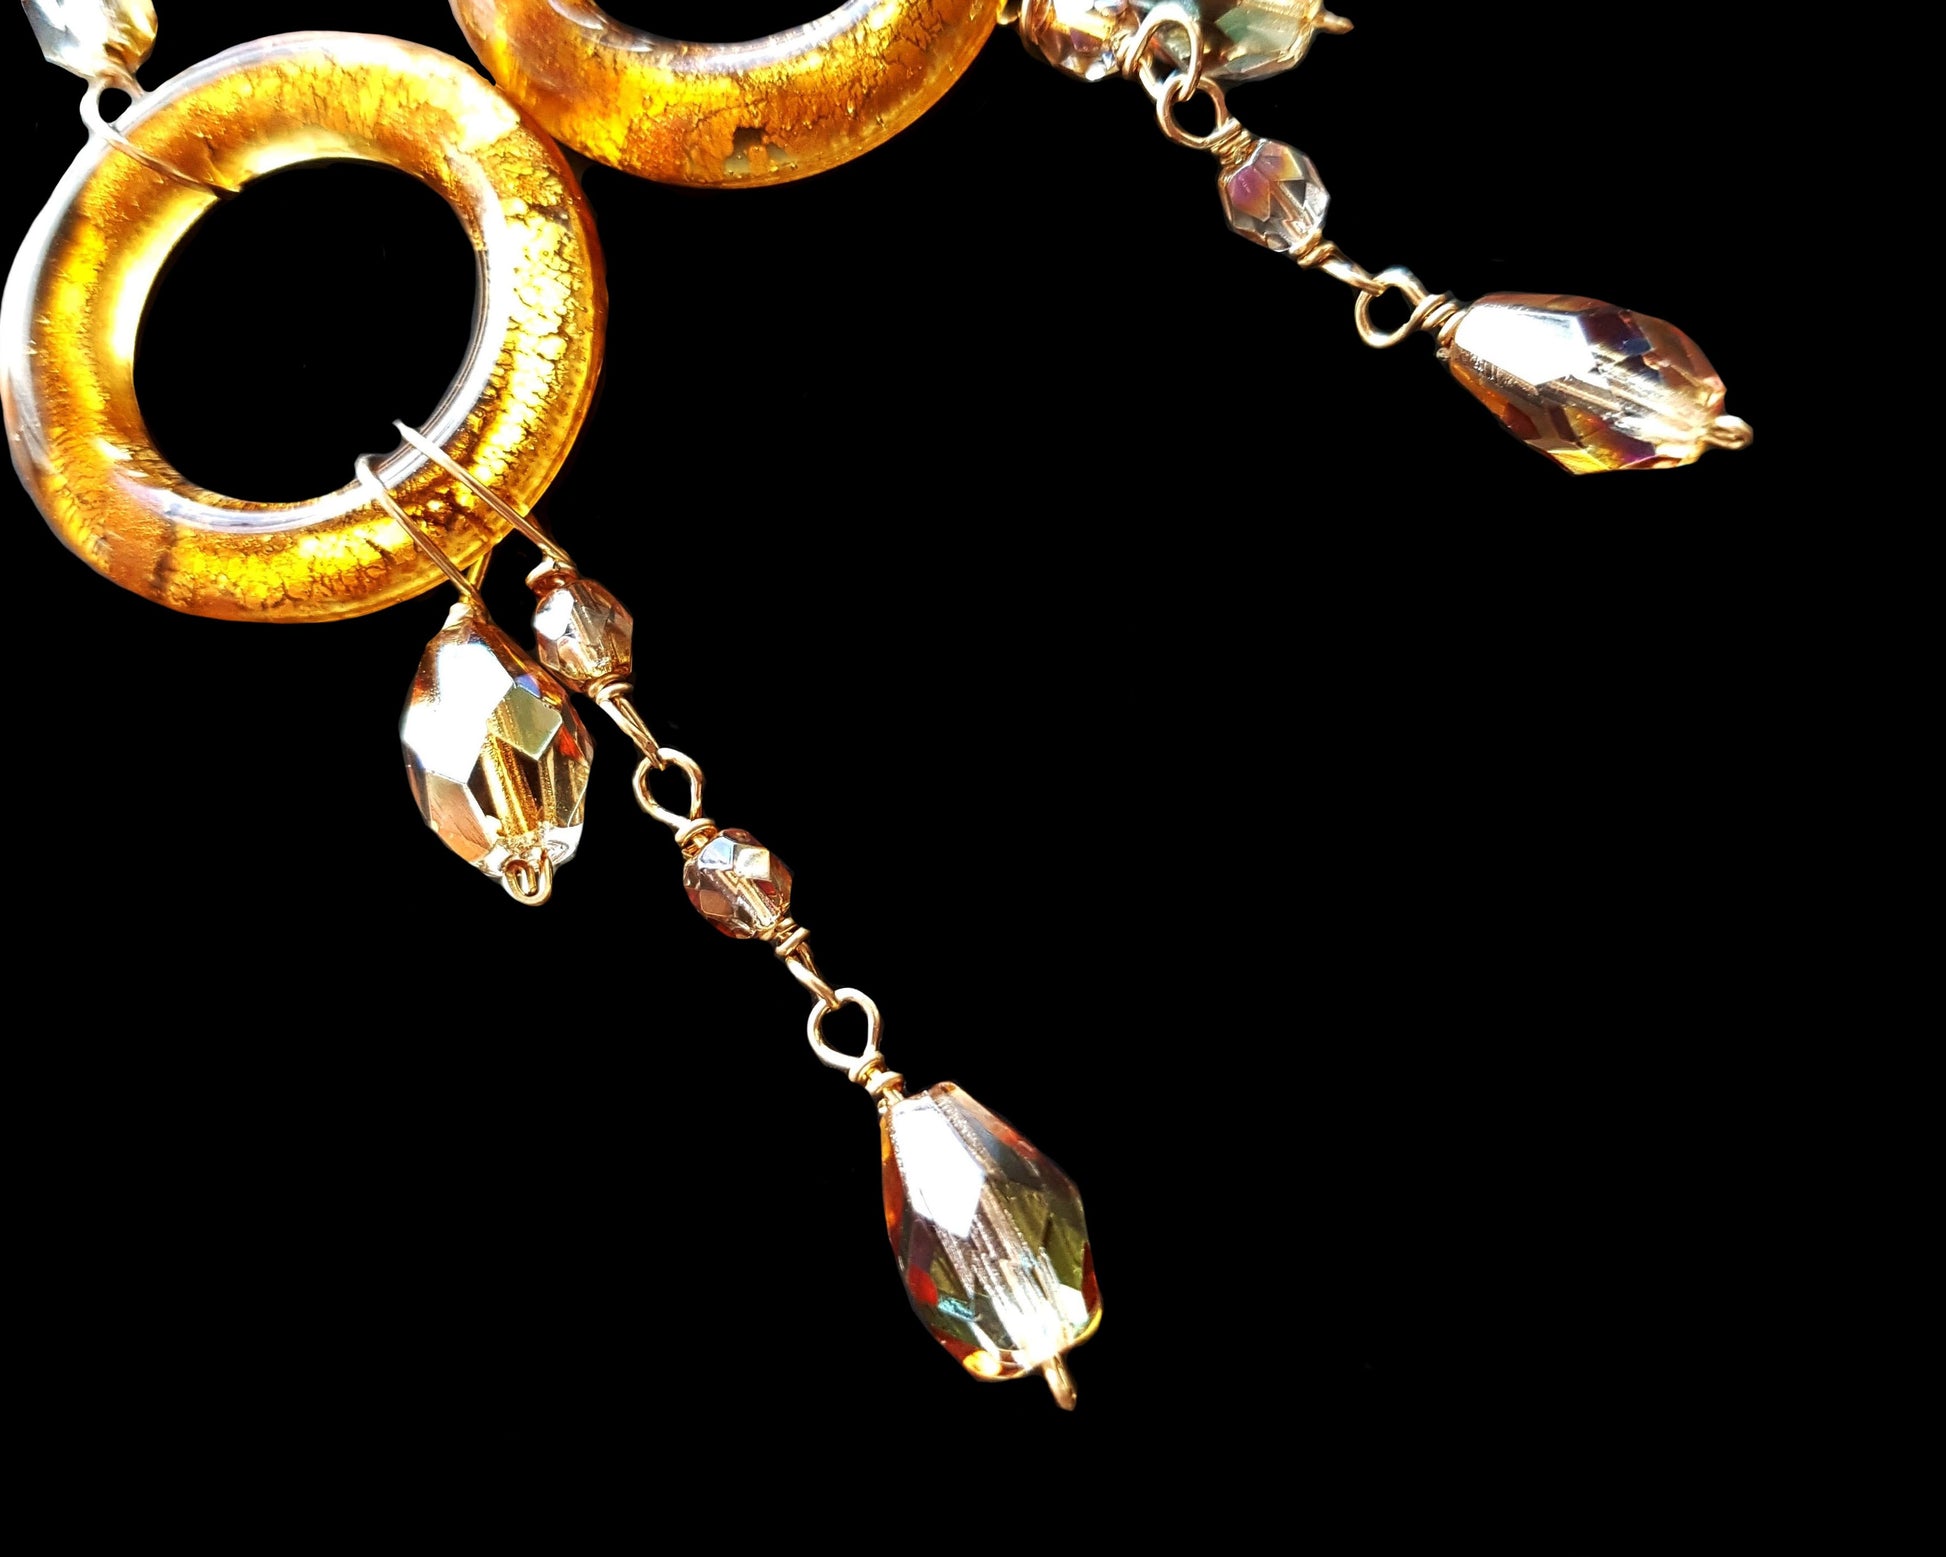 Long Gold Eternity Hoop Chandelier Earrings, 14k Gold Filled, Czech Fire Polish, round Foil Glass Circles and dangling beads.